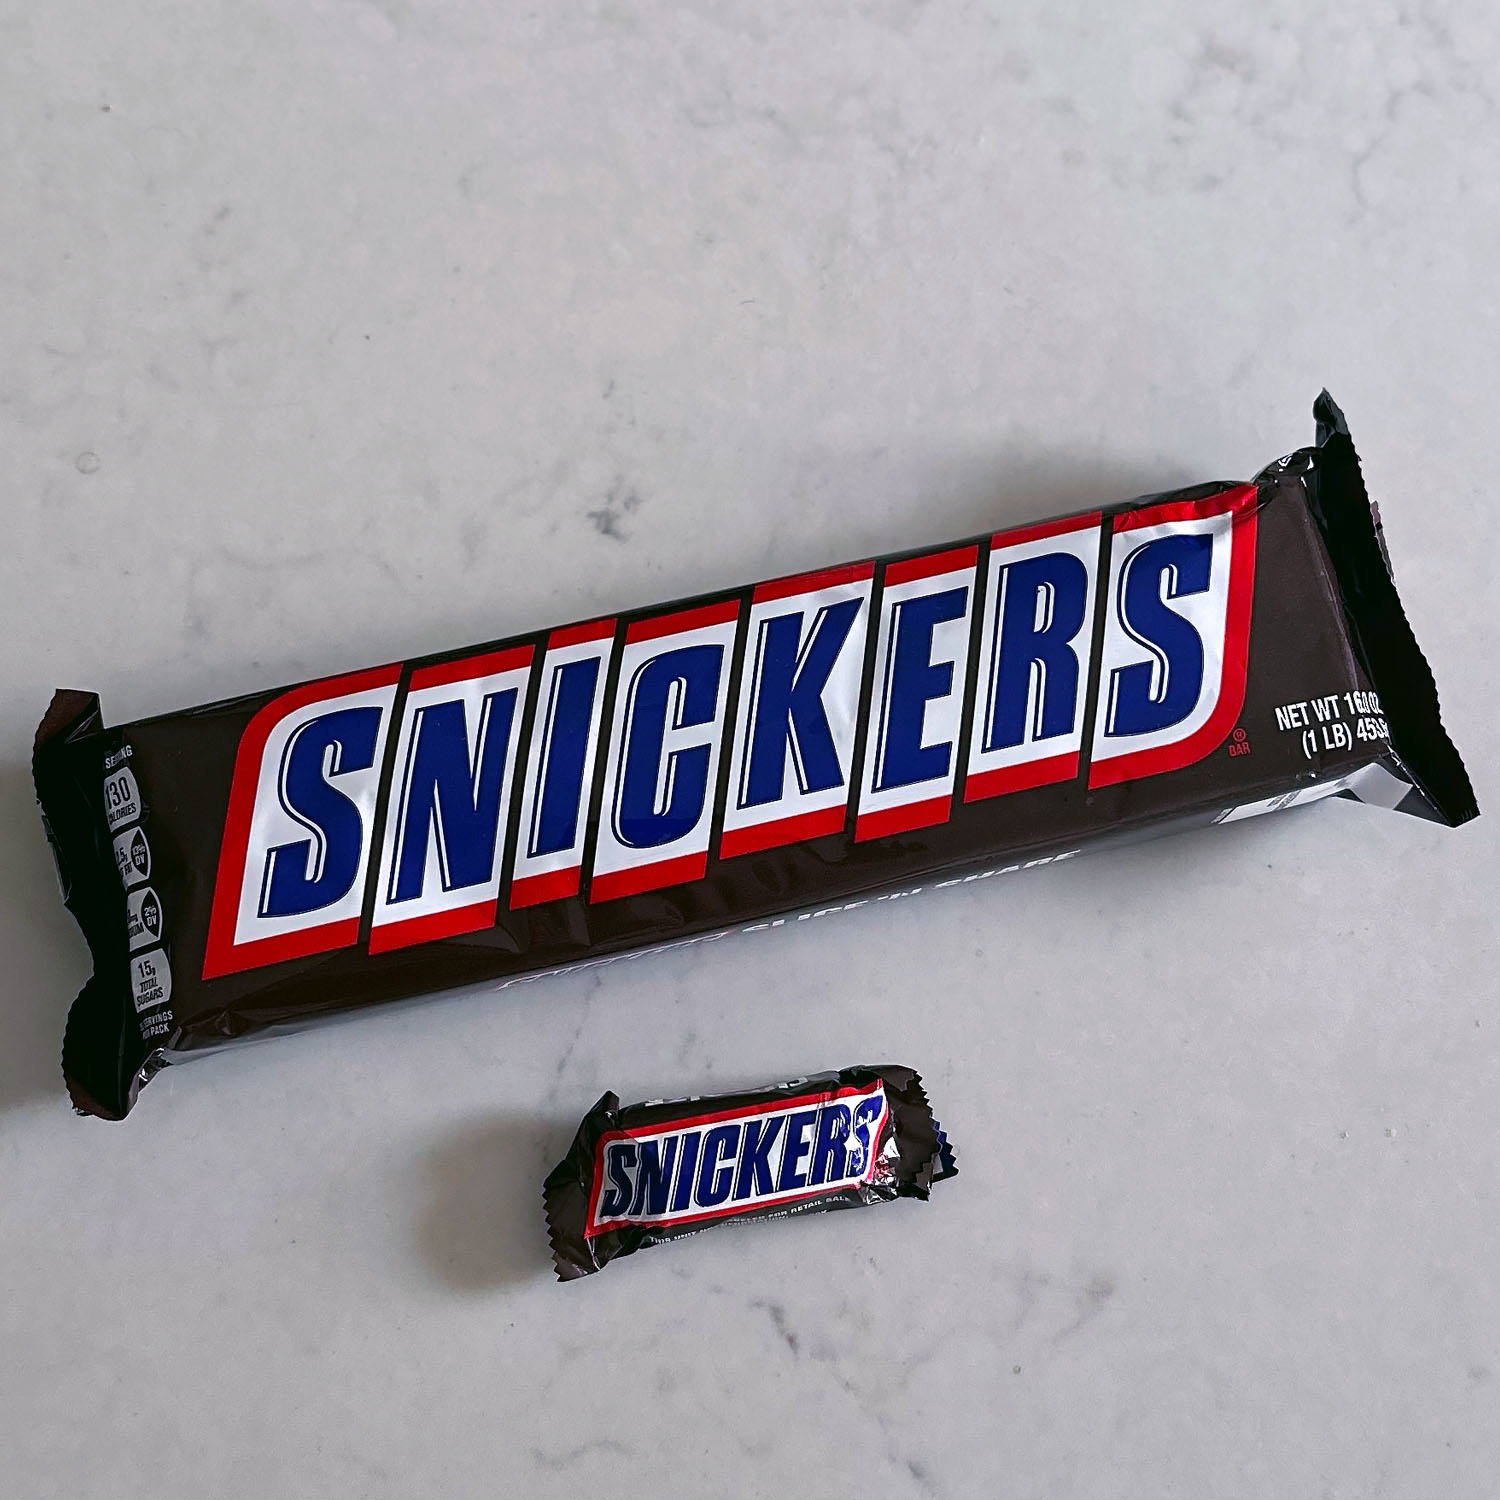 Giant one pound Snickers bar